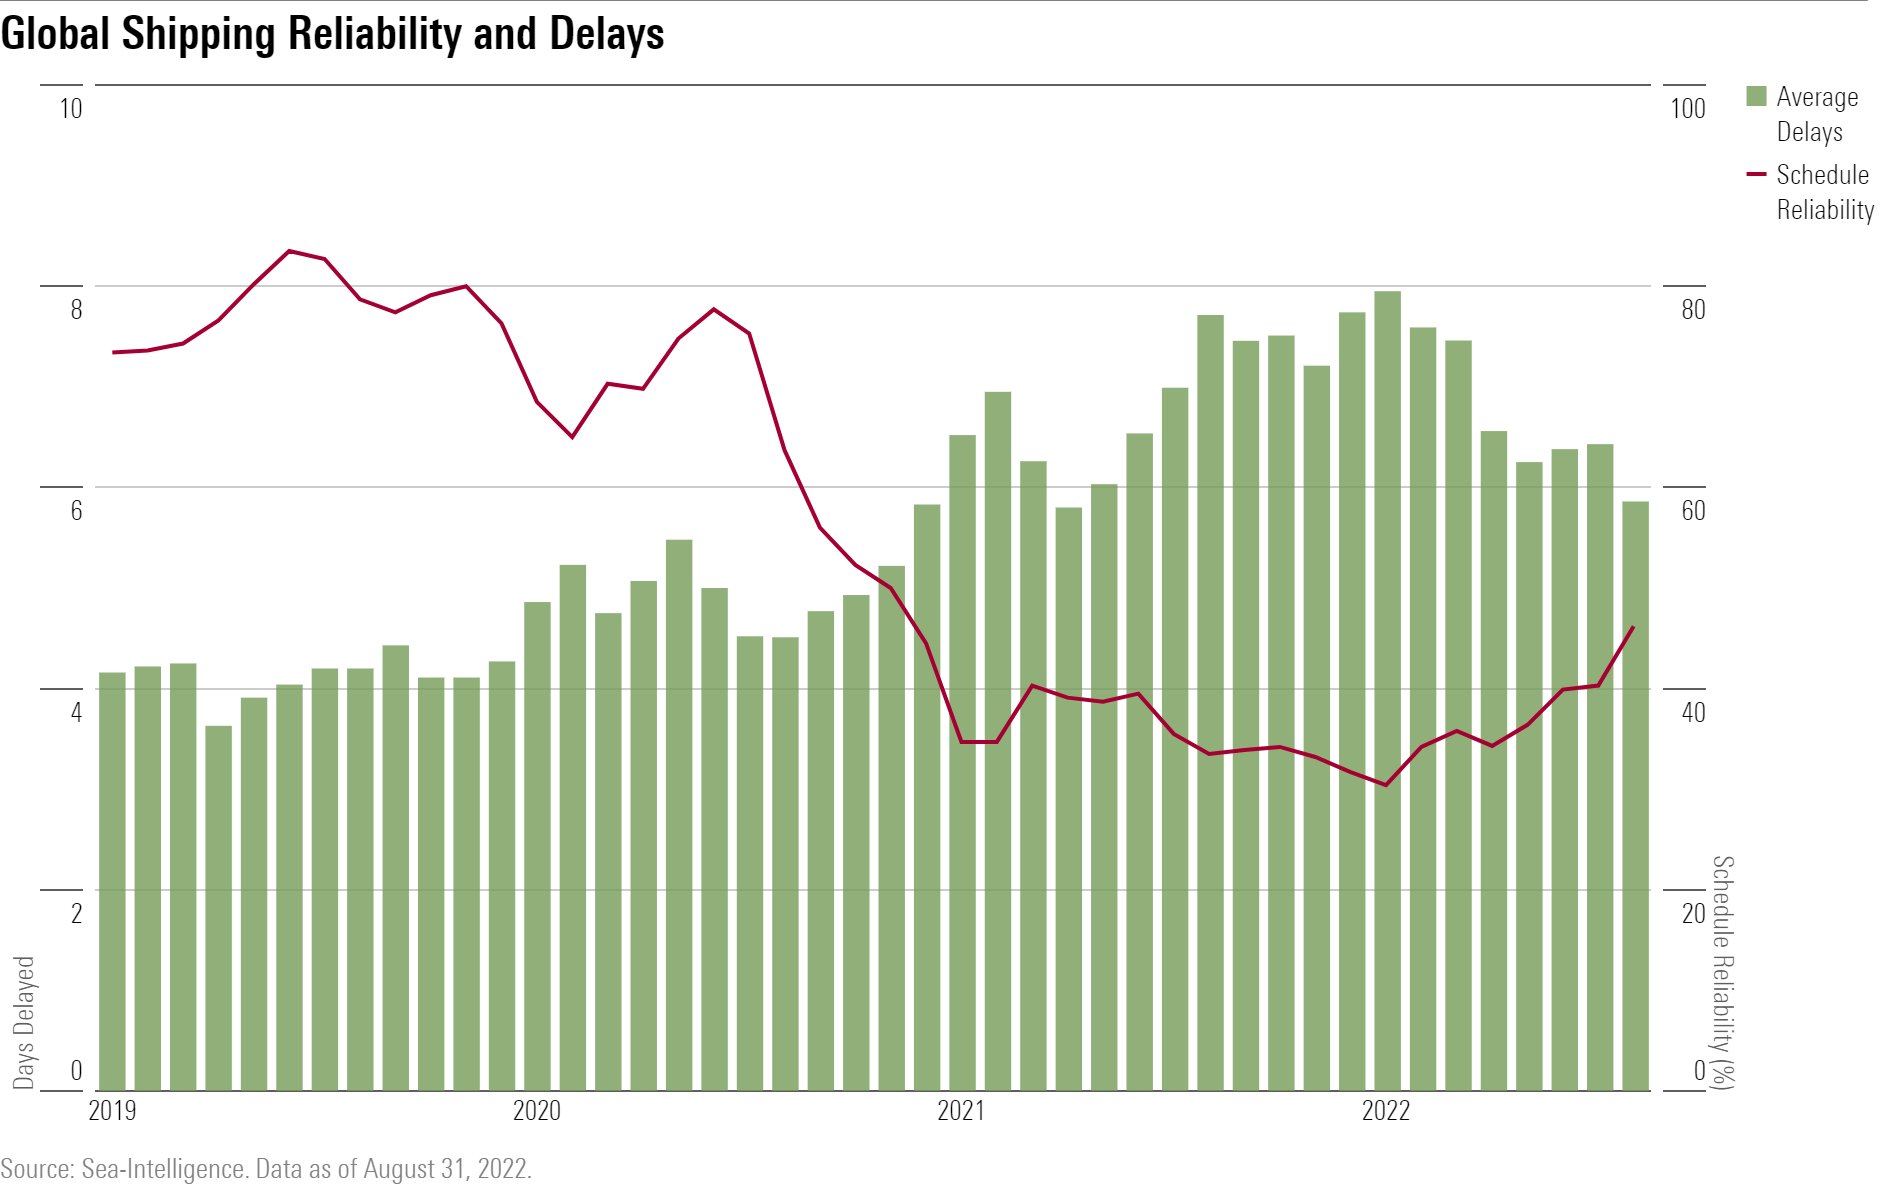 A line and bar chart showing reliability levels in shipments being delivered to ports on time across the world alongside the average number of days shipments are delayed on a monthly basis.